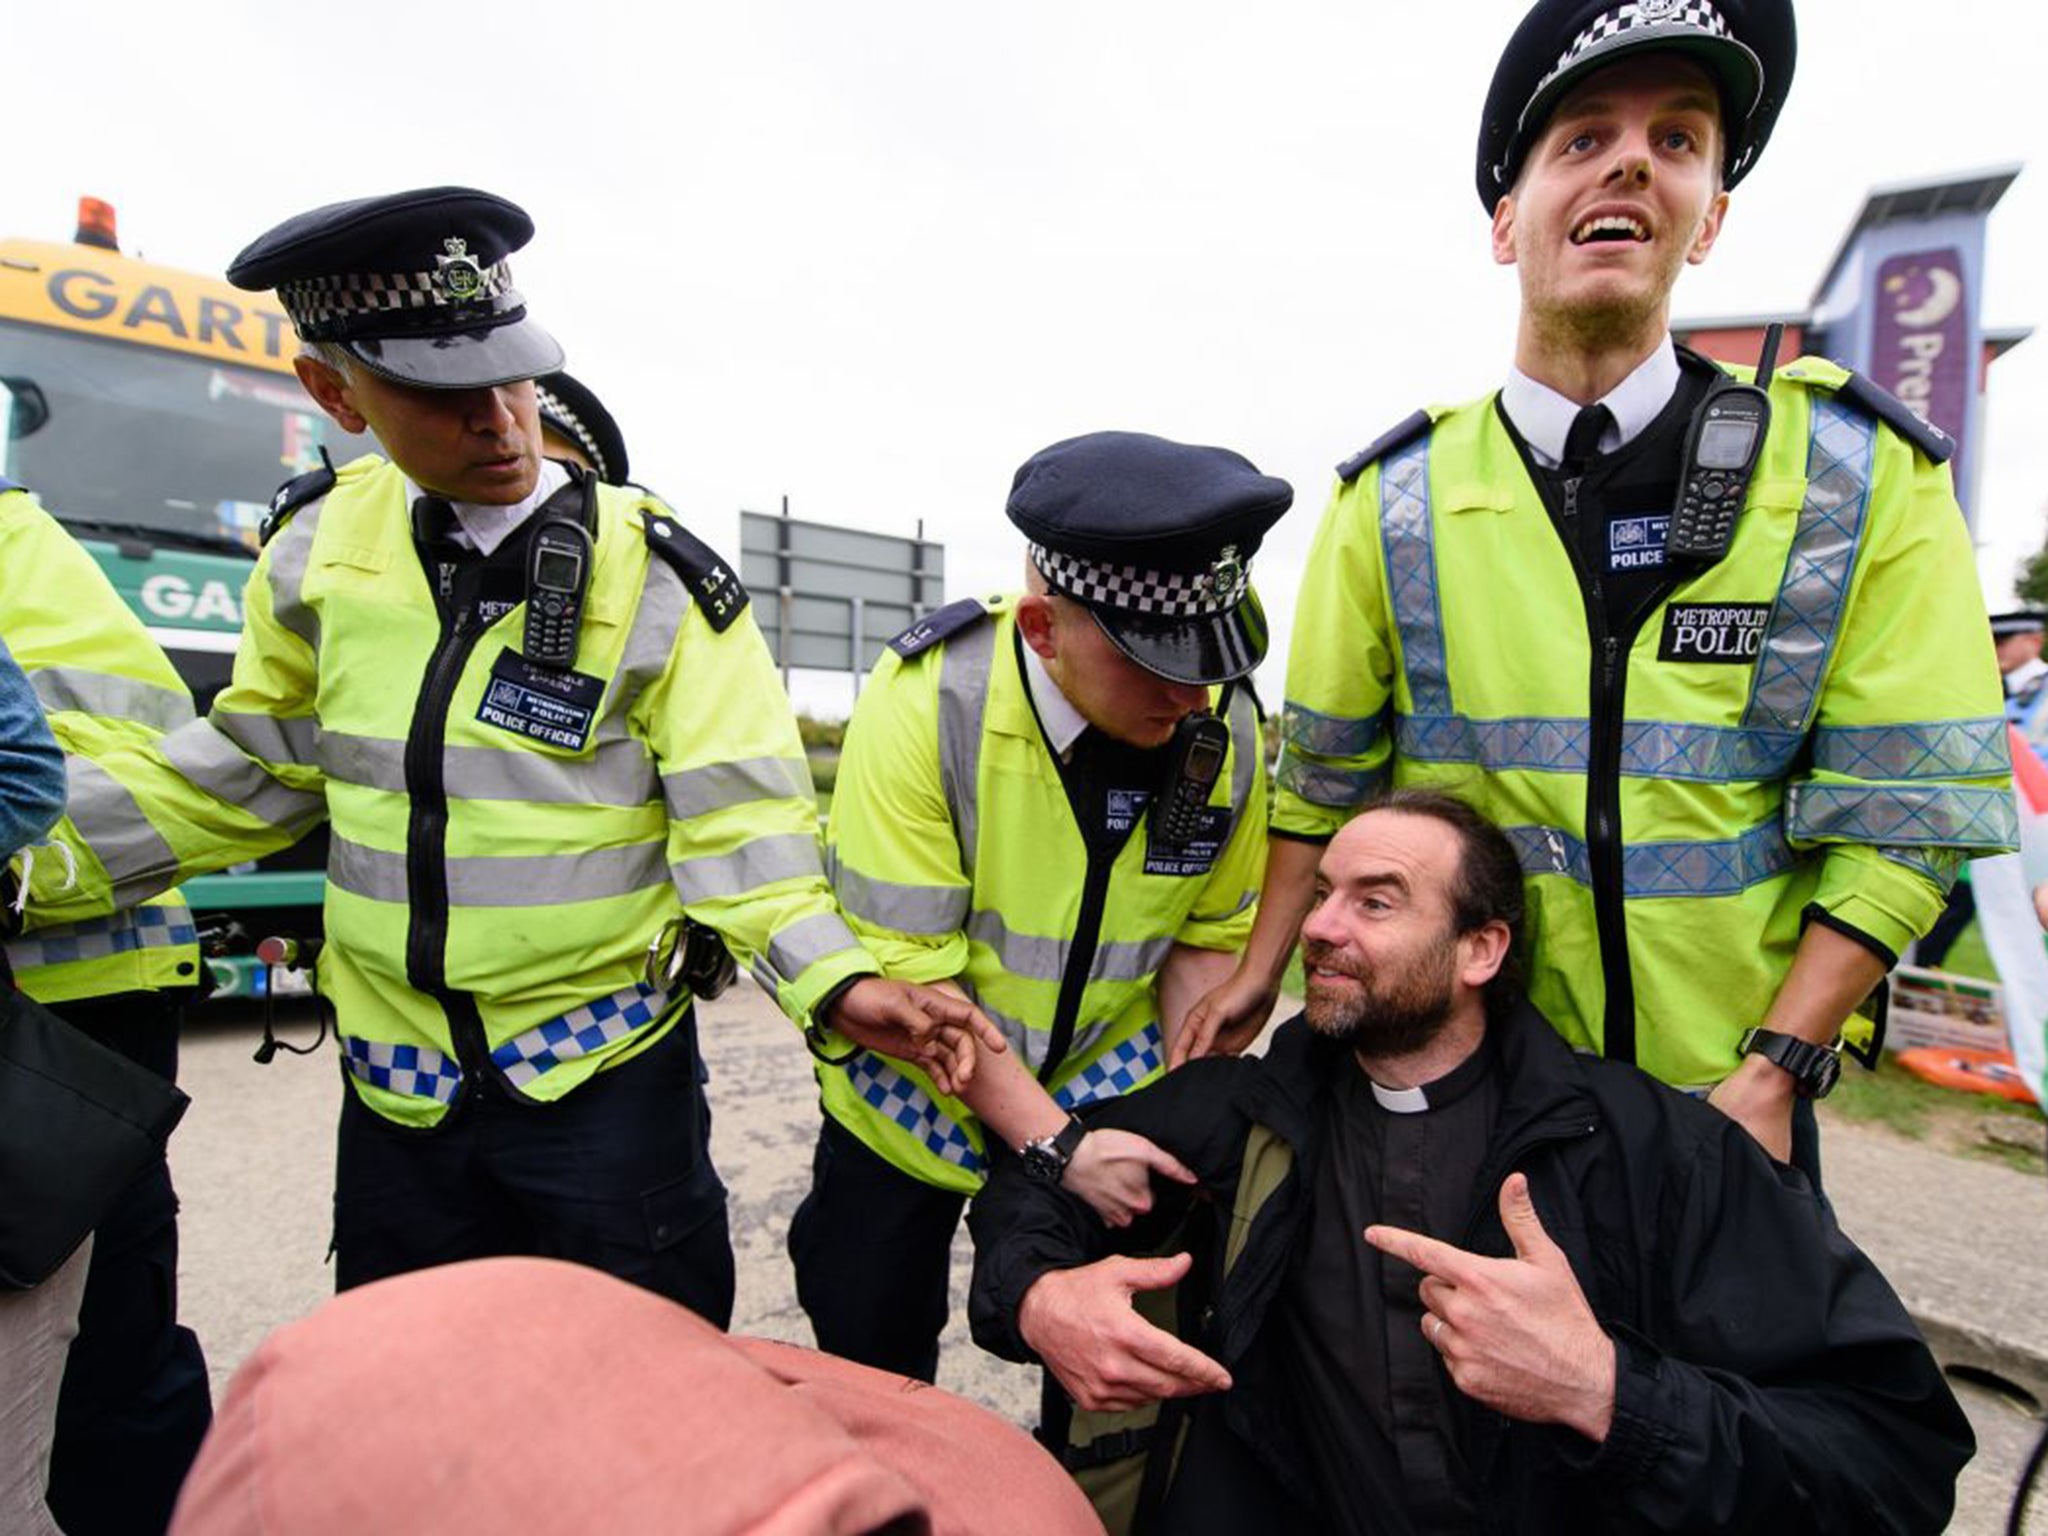 A protester is removed by police from a group highlighting their opposition to Israel’s actions against Palestine